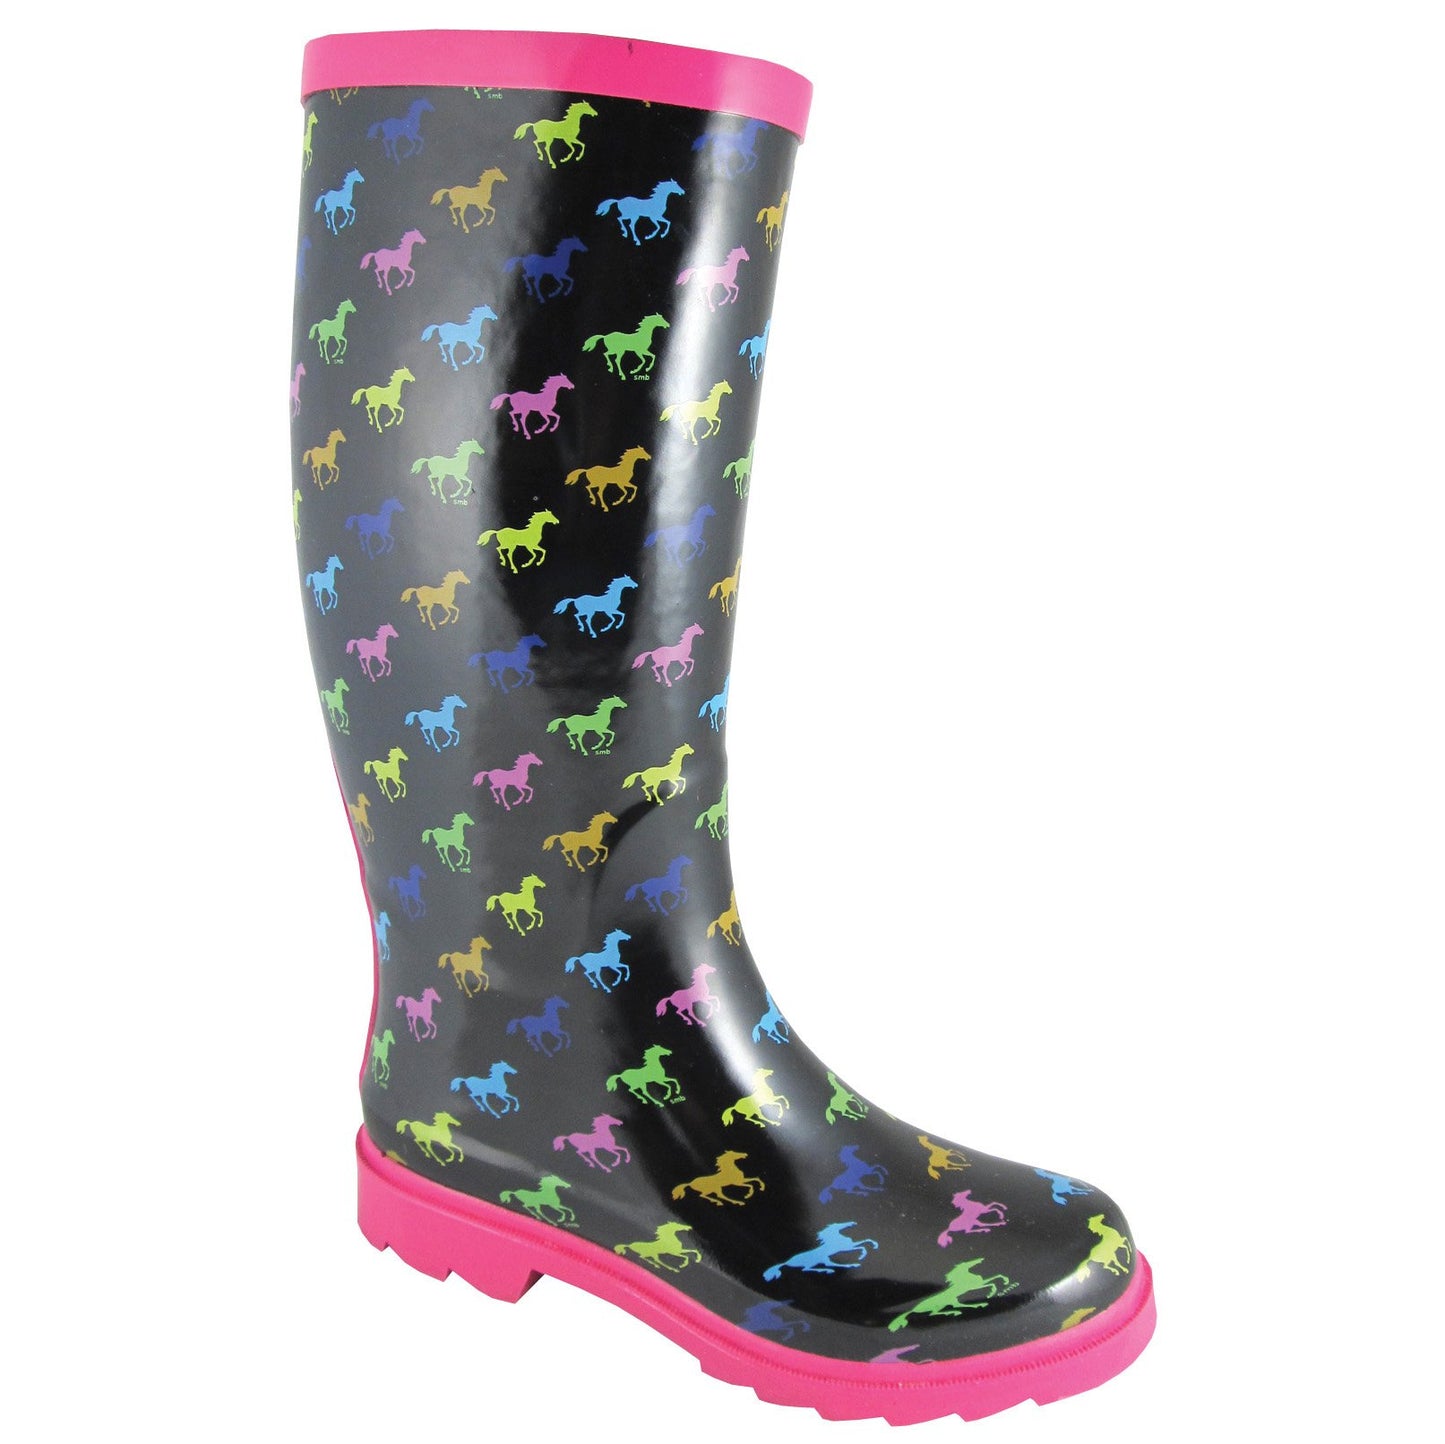 Smoky Mountain Women's Black Rubber Boot With Multi Color Ponies